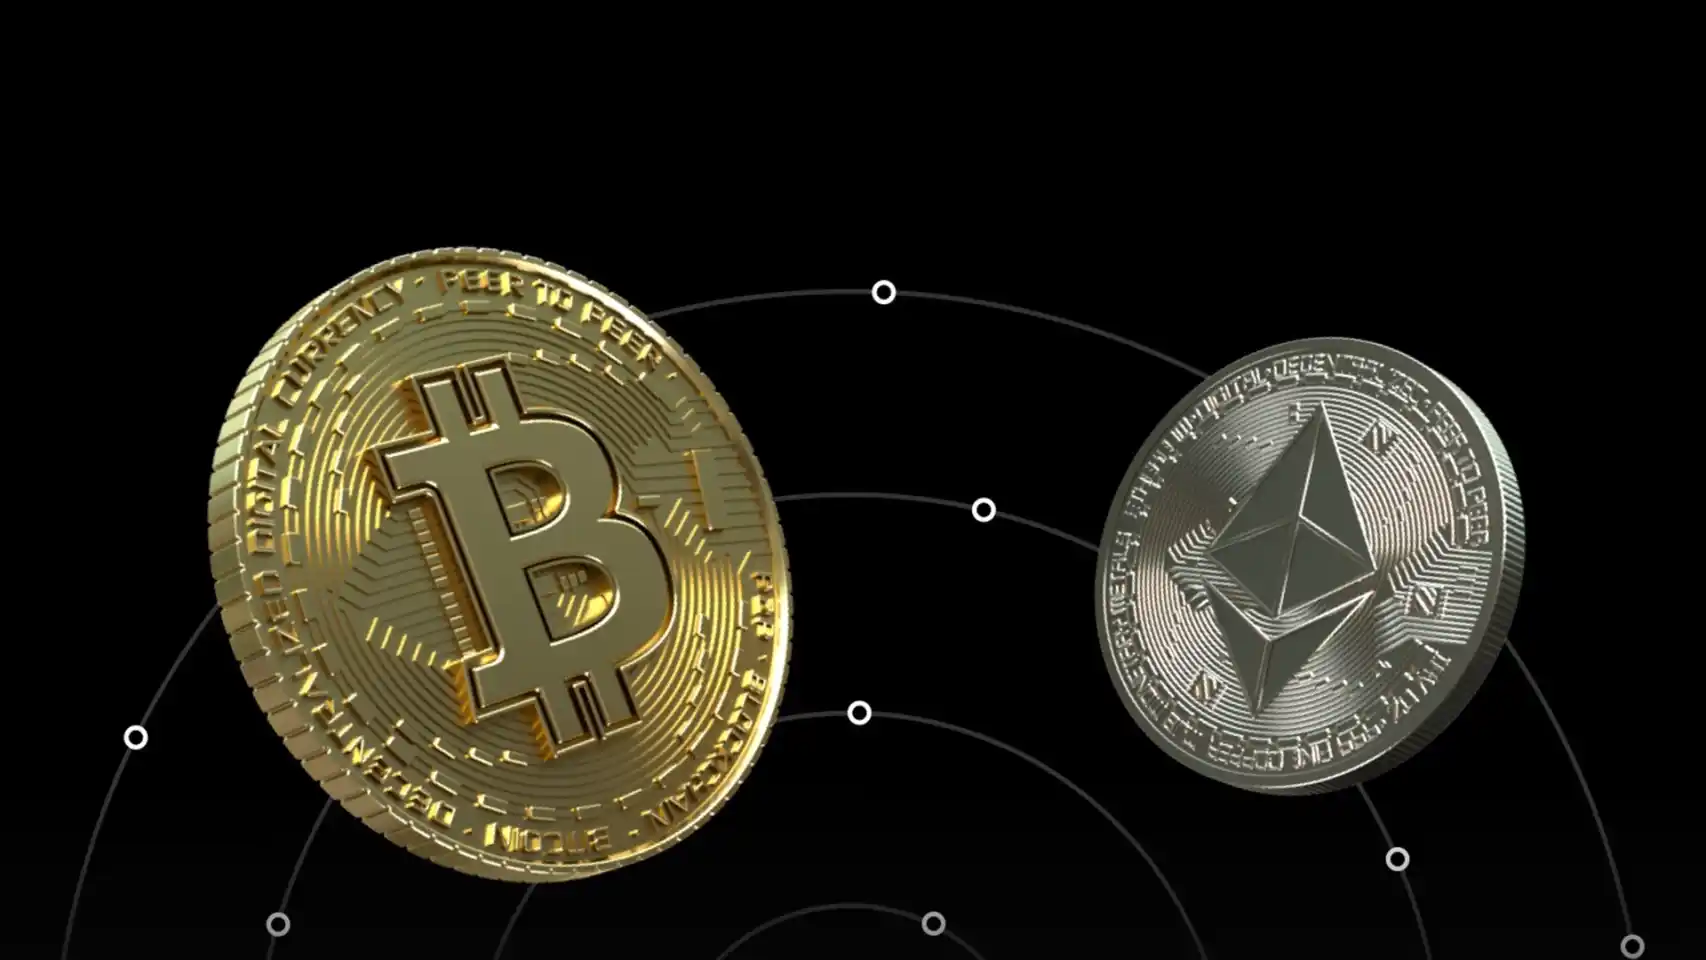 Bitcoin and ethereum registered a drop in their price of around 4% in a volatile market as a result of the war between Russia and Ukraine